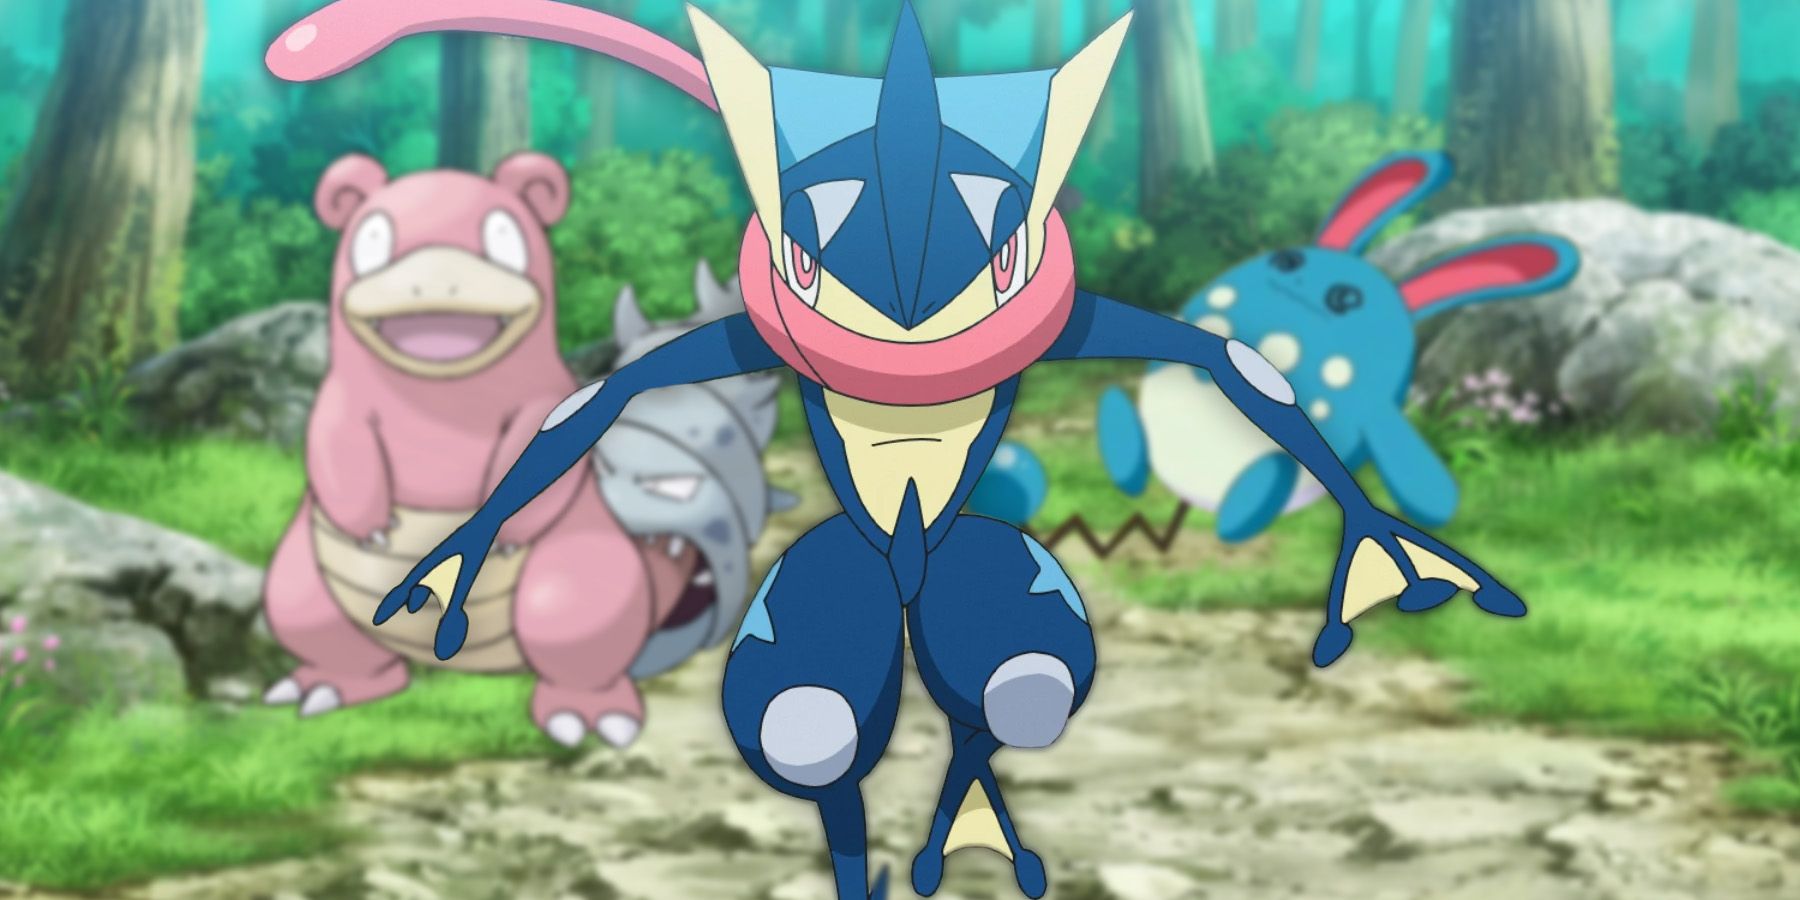 Pokemon Greninja stands before Slowbro And Azumarill in forest